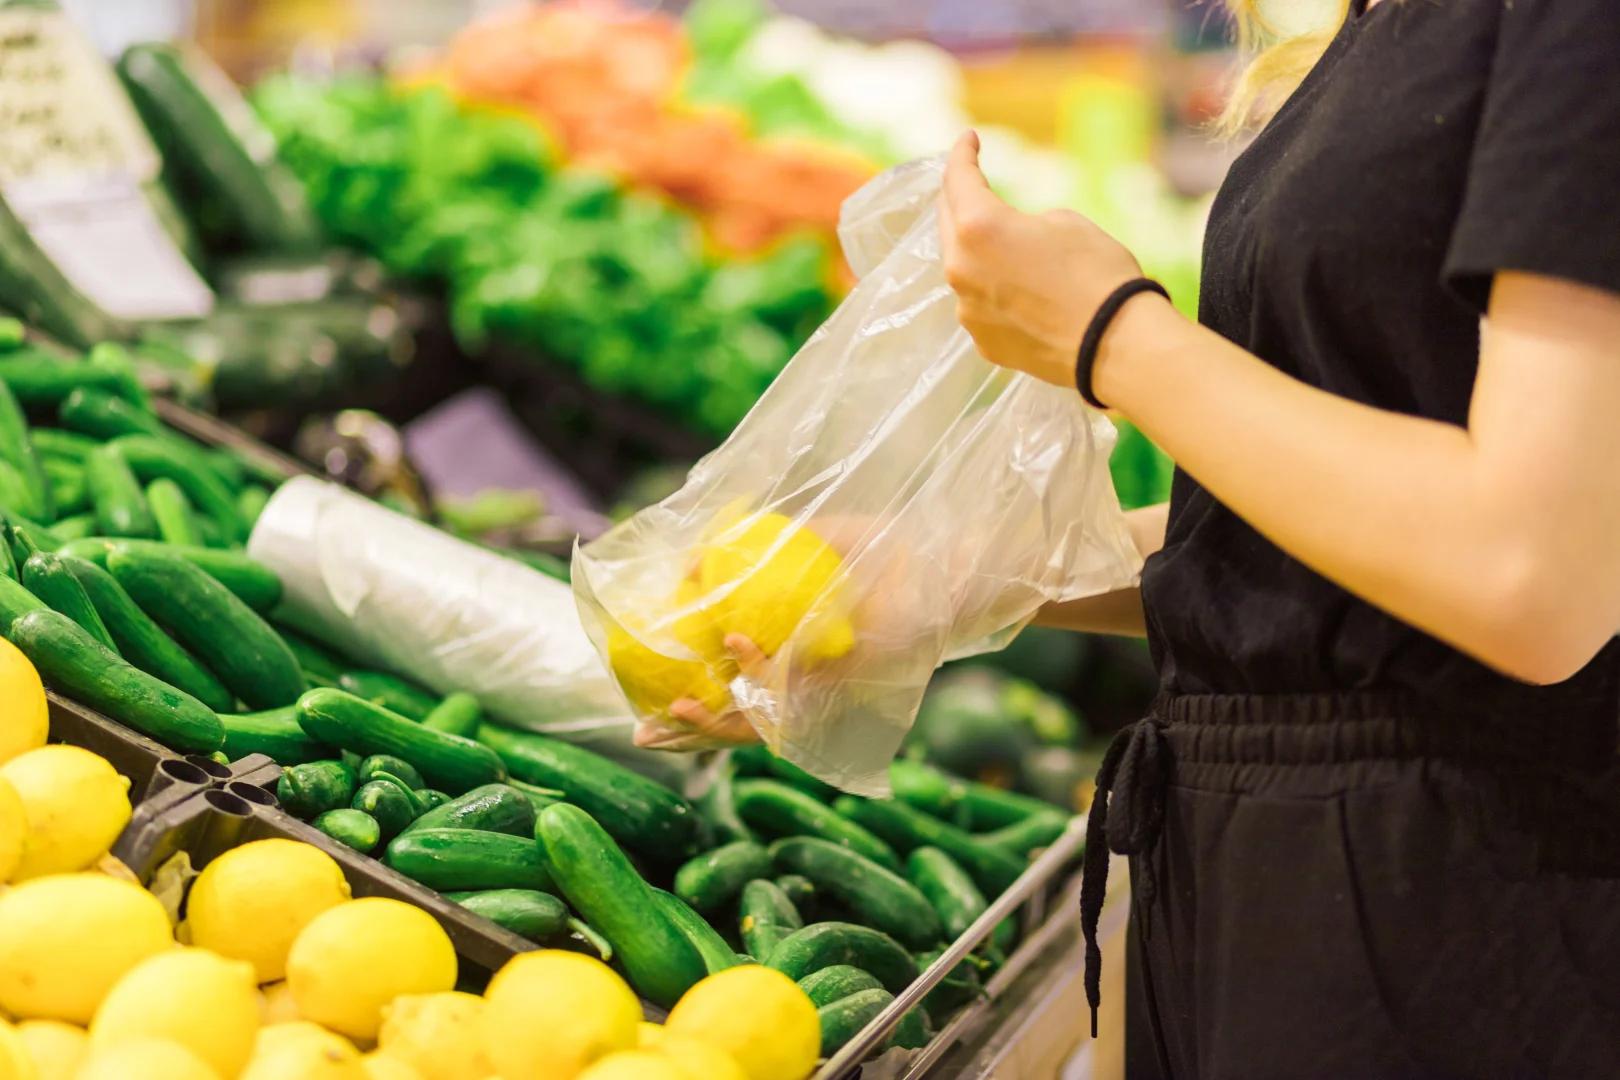 Study: Plastic shopping bags less harmful to environment than cotton bags